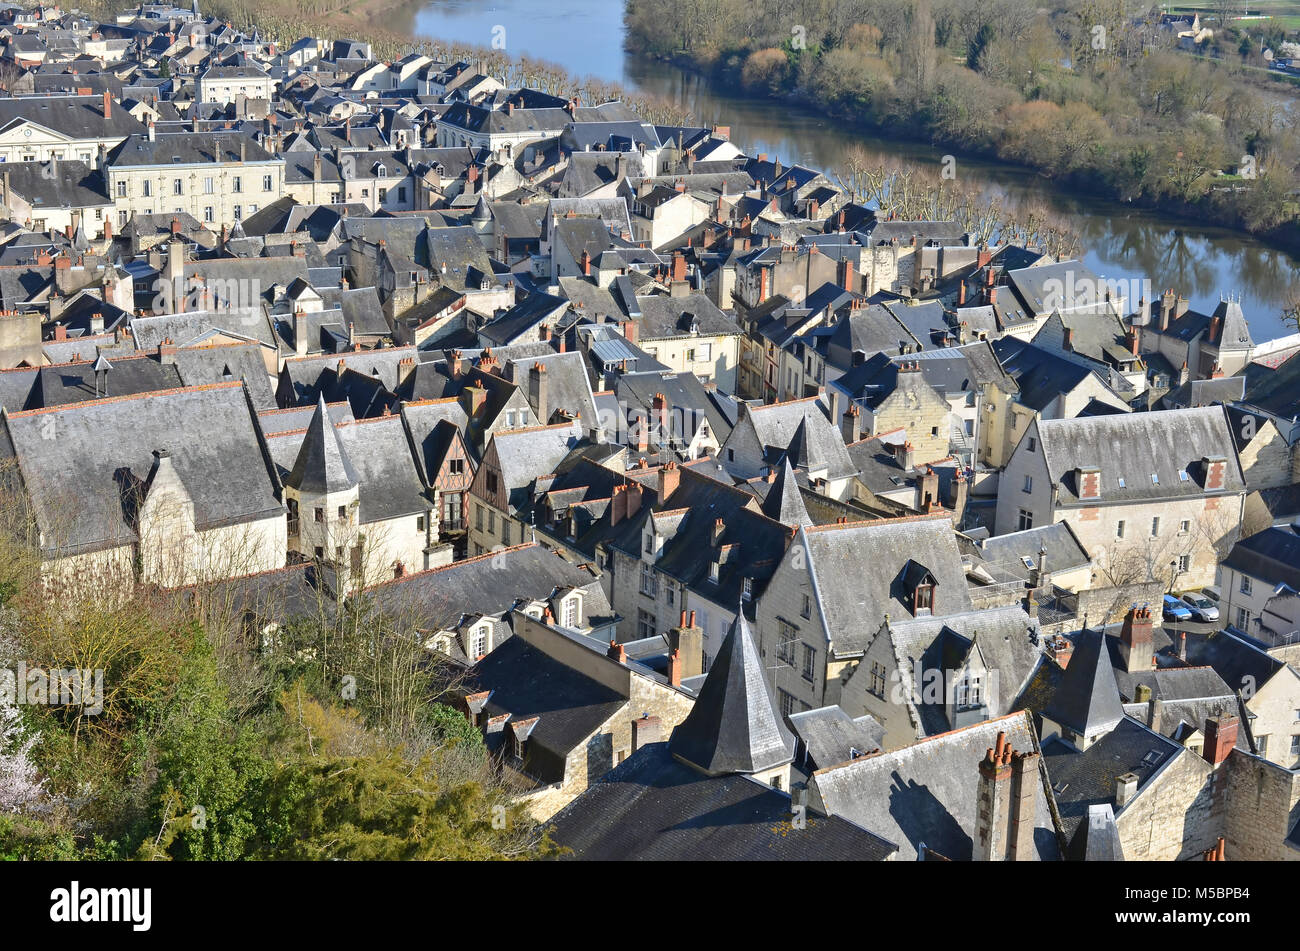 The slate roofs of the medieval fortress town of Chinon on the banks of the river Vienne, in France Stock Photo